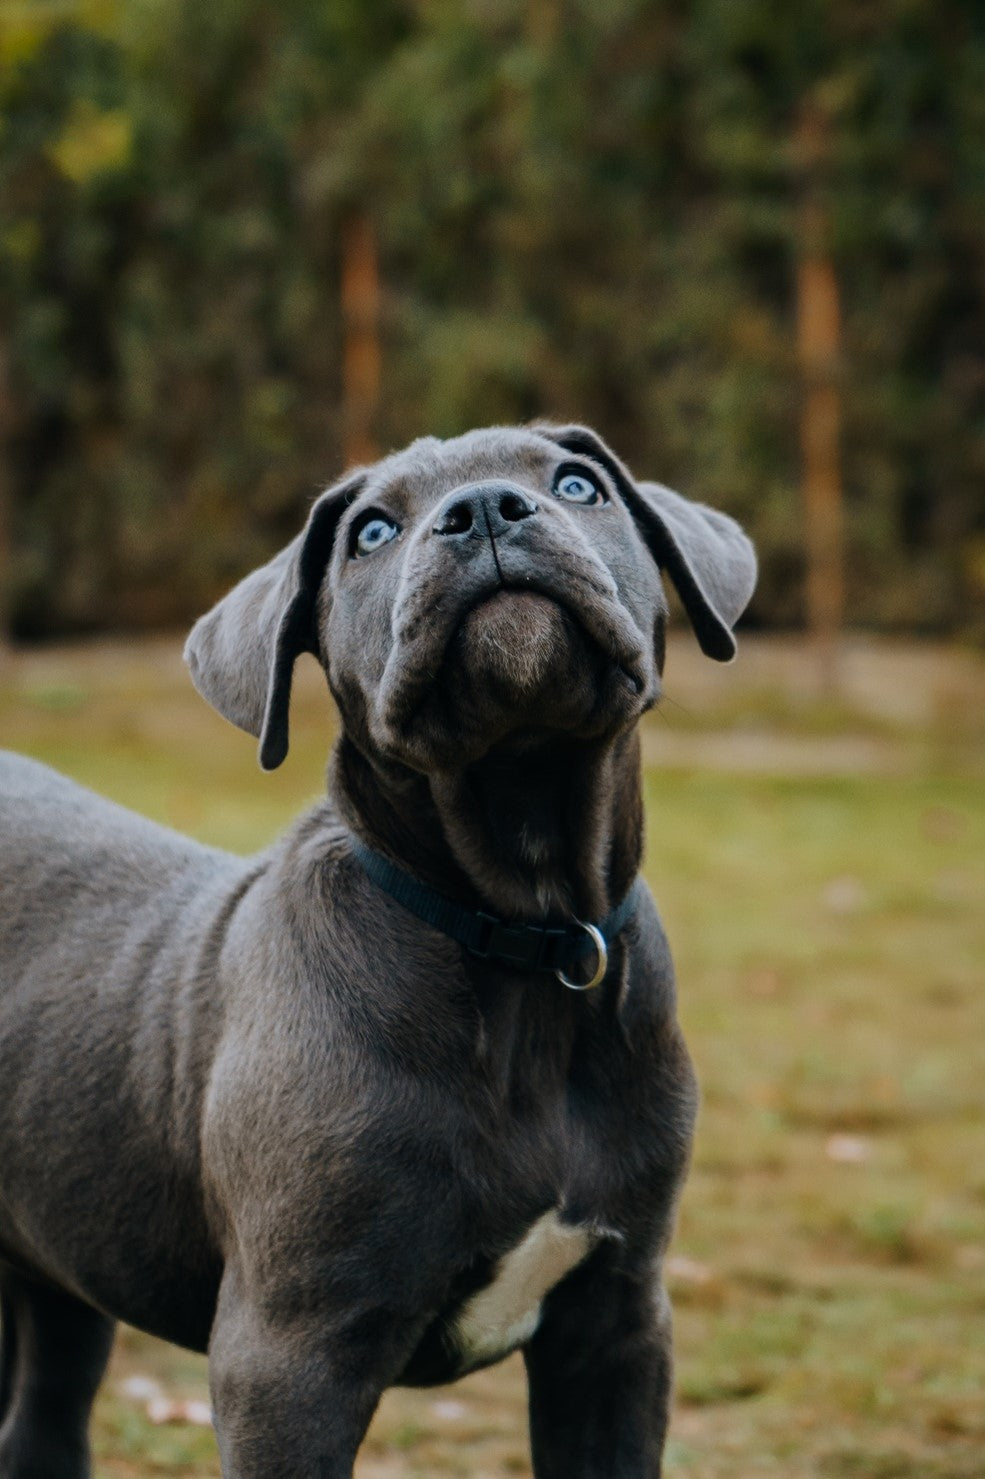 What is the most googled dog? The Cane Corso is the most googled dog